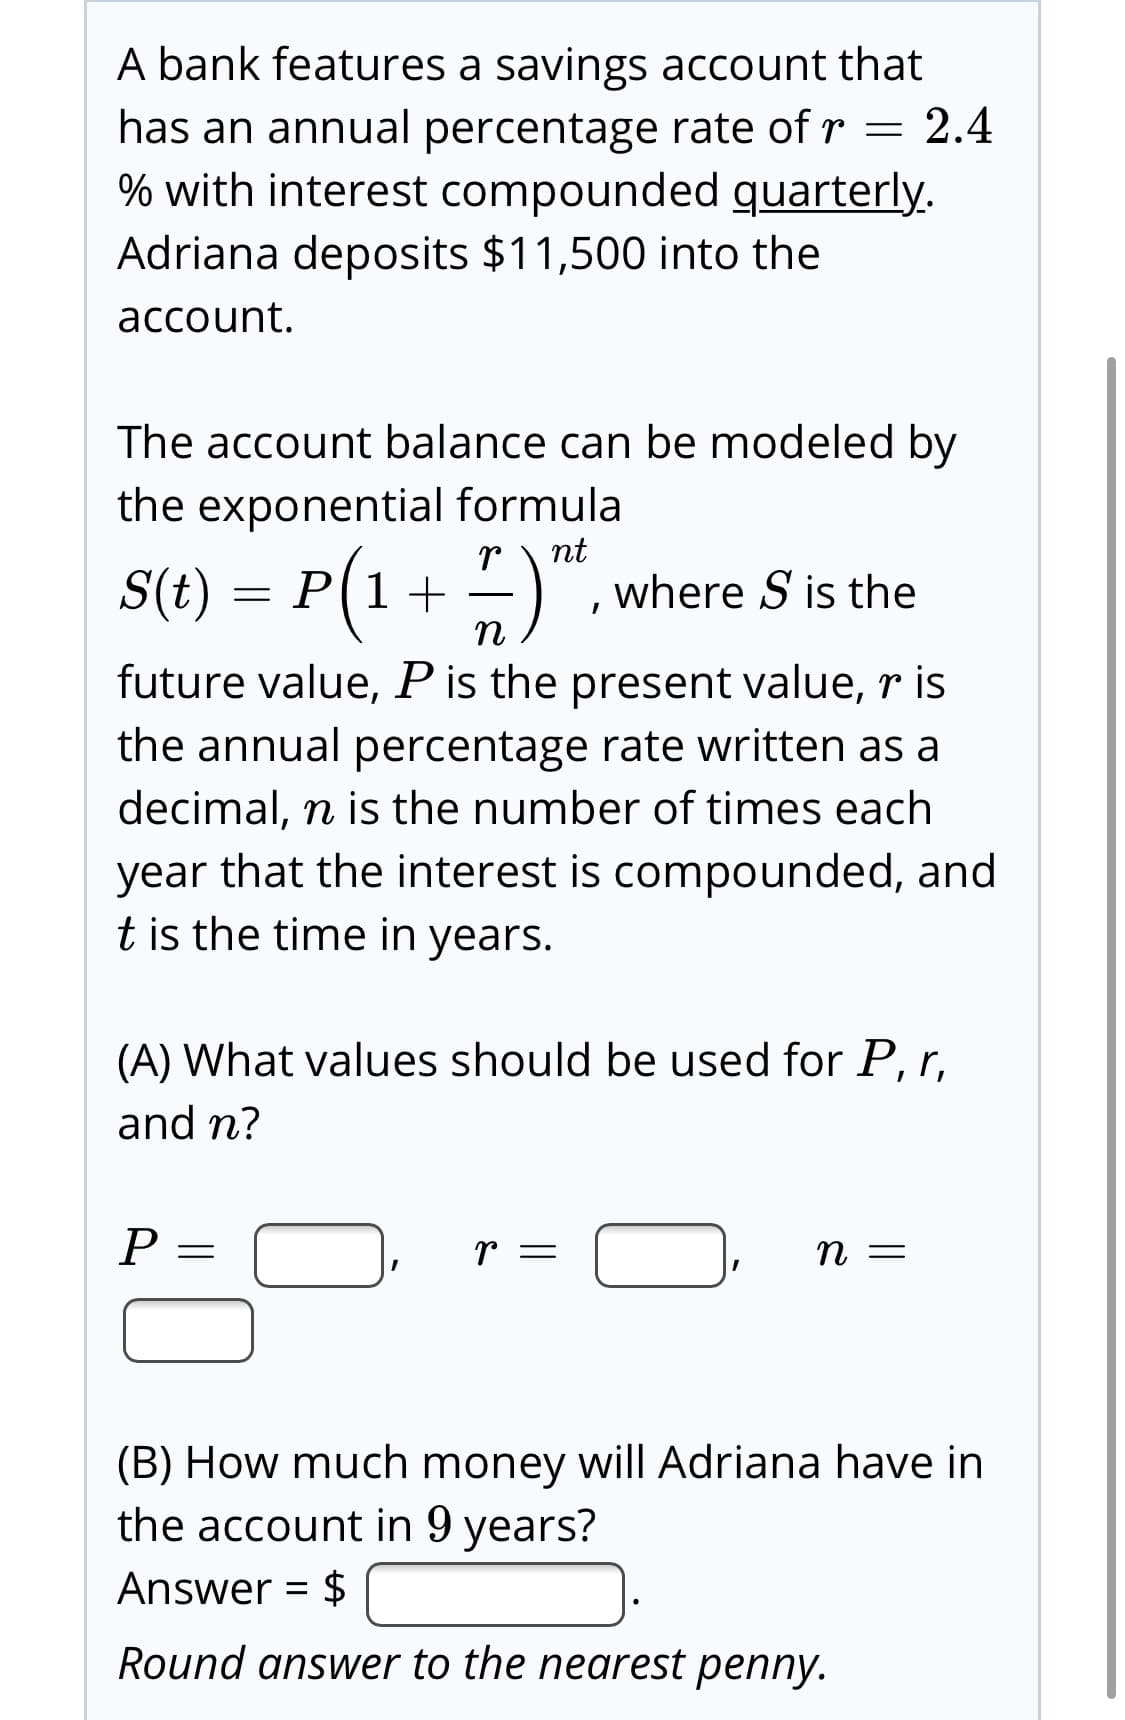 A bank features a savings account that
2.4
has an annual percentage rate of r =
% with interest compounded quarterly.
Adriana deposits $11,500 into the
account.
The account balance can be modeled by
the exponential formula
S(t) = P(1 + ")".
where S is the
future value, Pis the present value, r is
the annual percentage rate written as a
decimal, n is the number of times each
year that the interest is compounded, and
t is the time in years.
(A) What values should be used for P, r,
and n?
(B) How much money will Adriana have in
the account in 9 years?
Answer = $
Round answer to the nearest penny.
